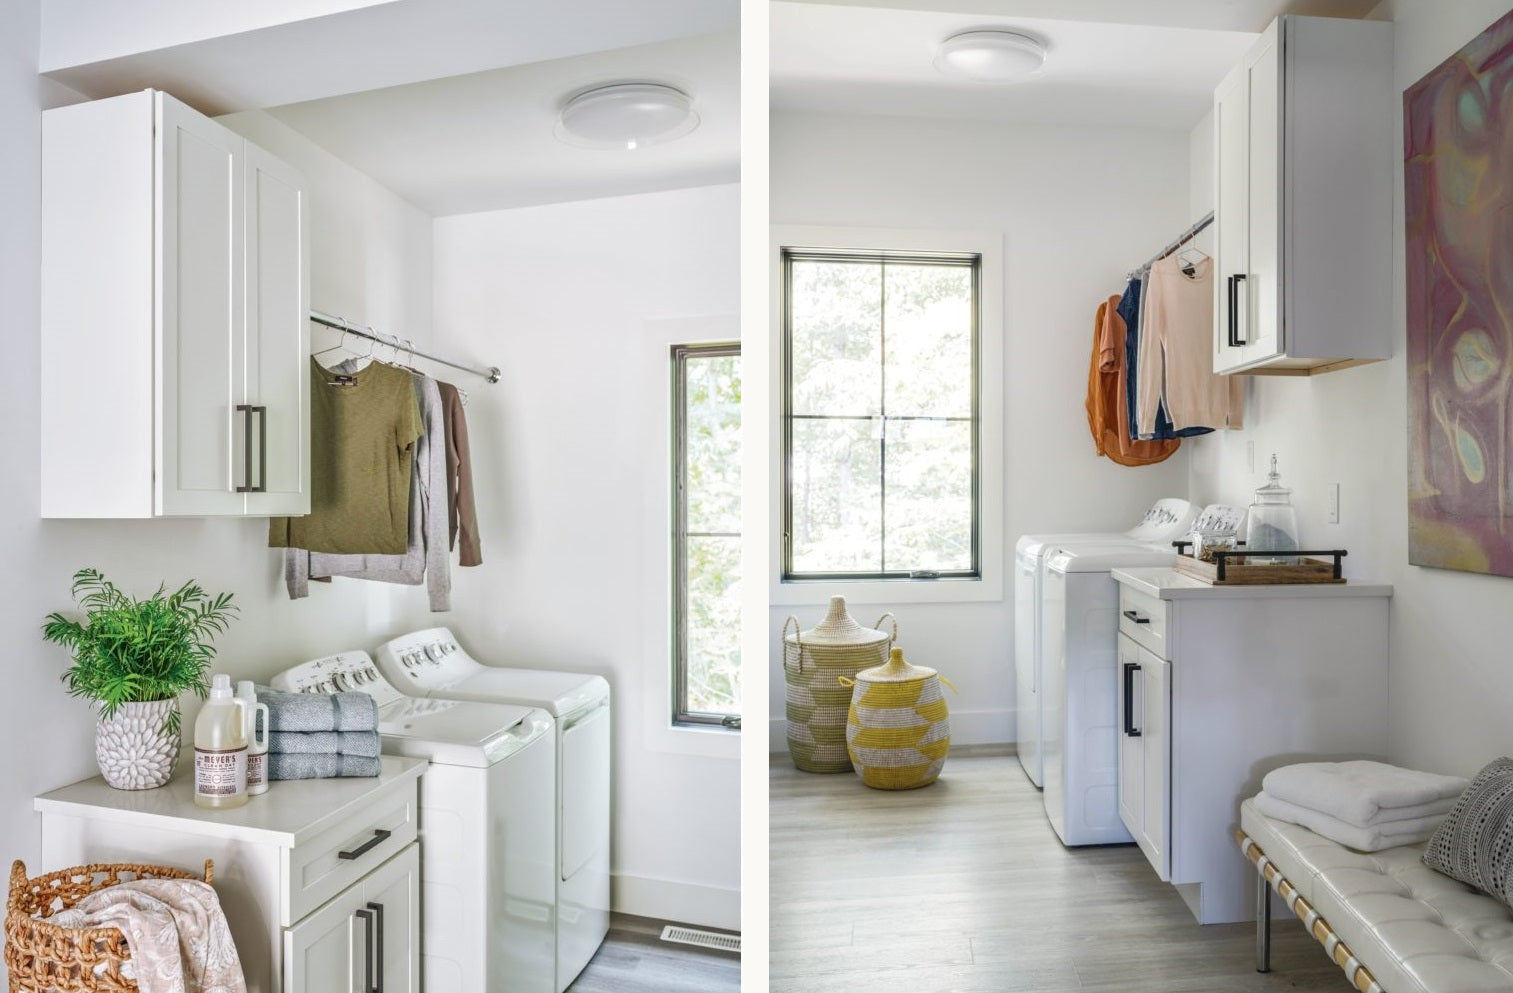 Mantra Cabinetry, Omni Snow Laundry Rooms